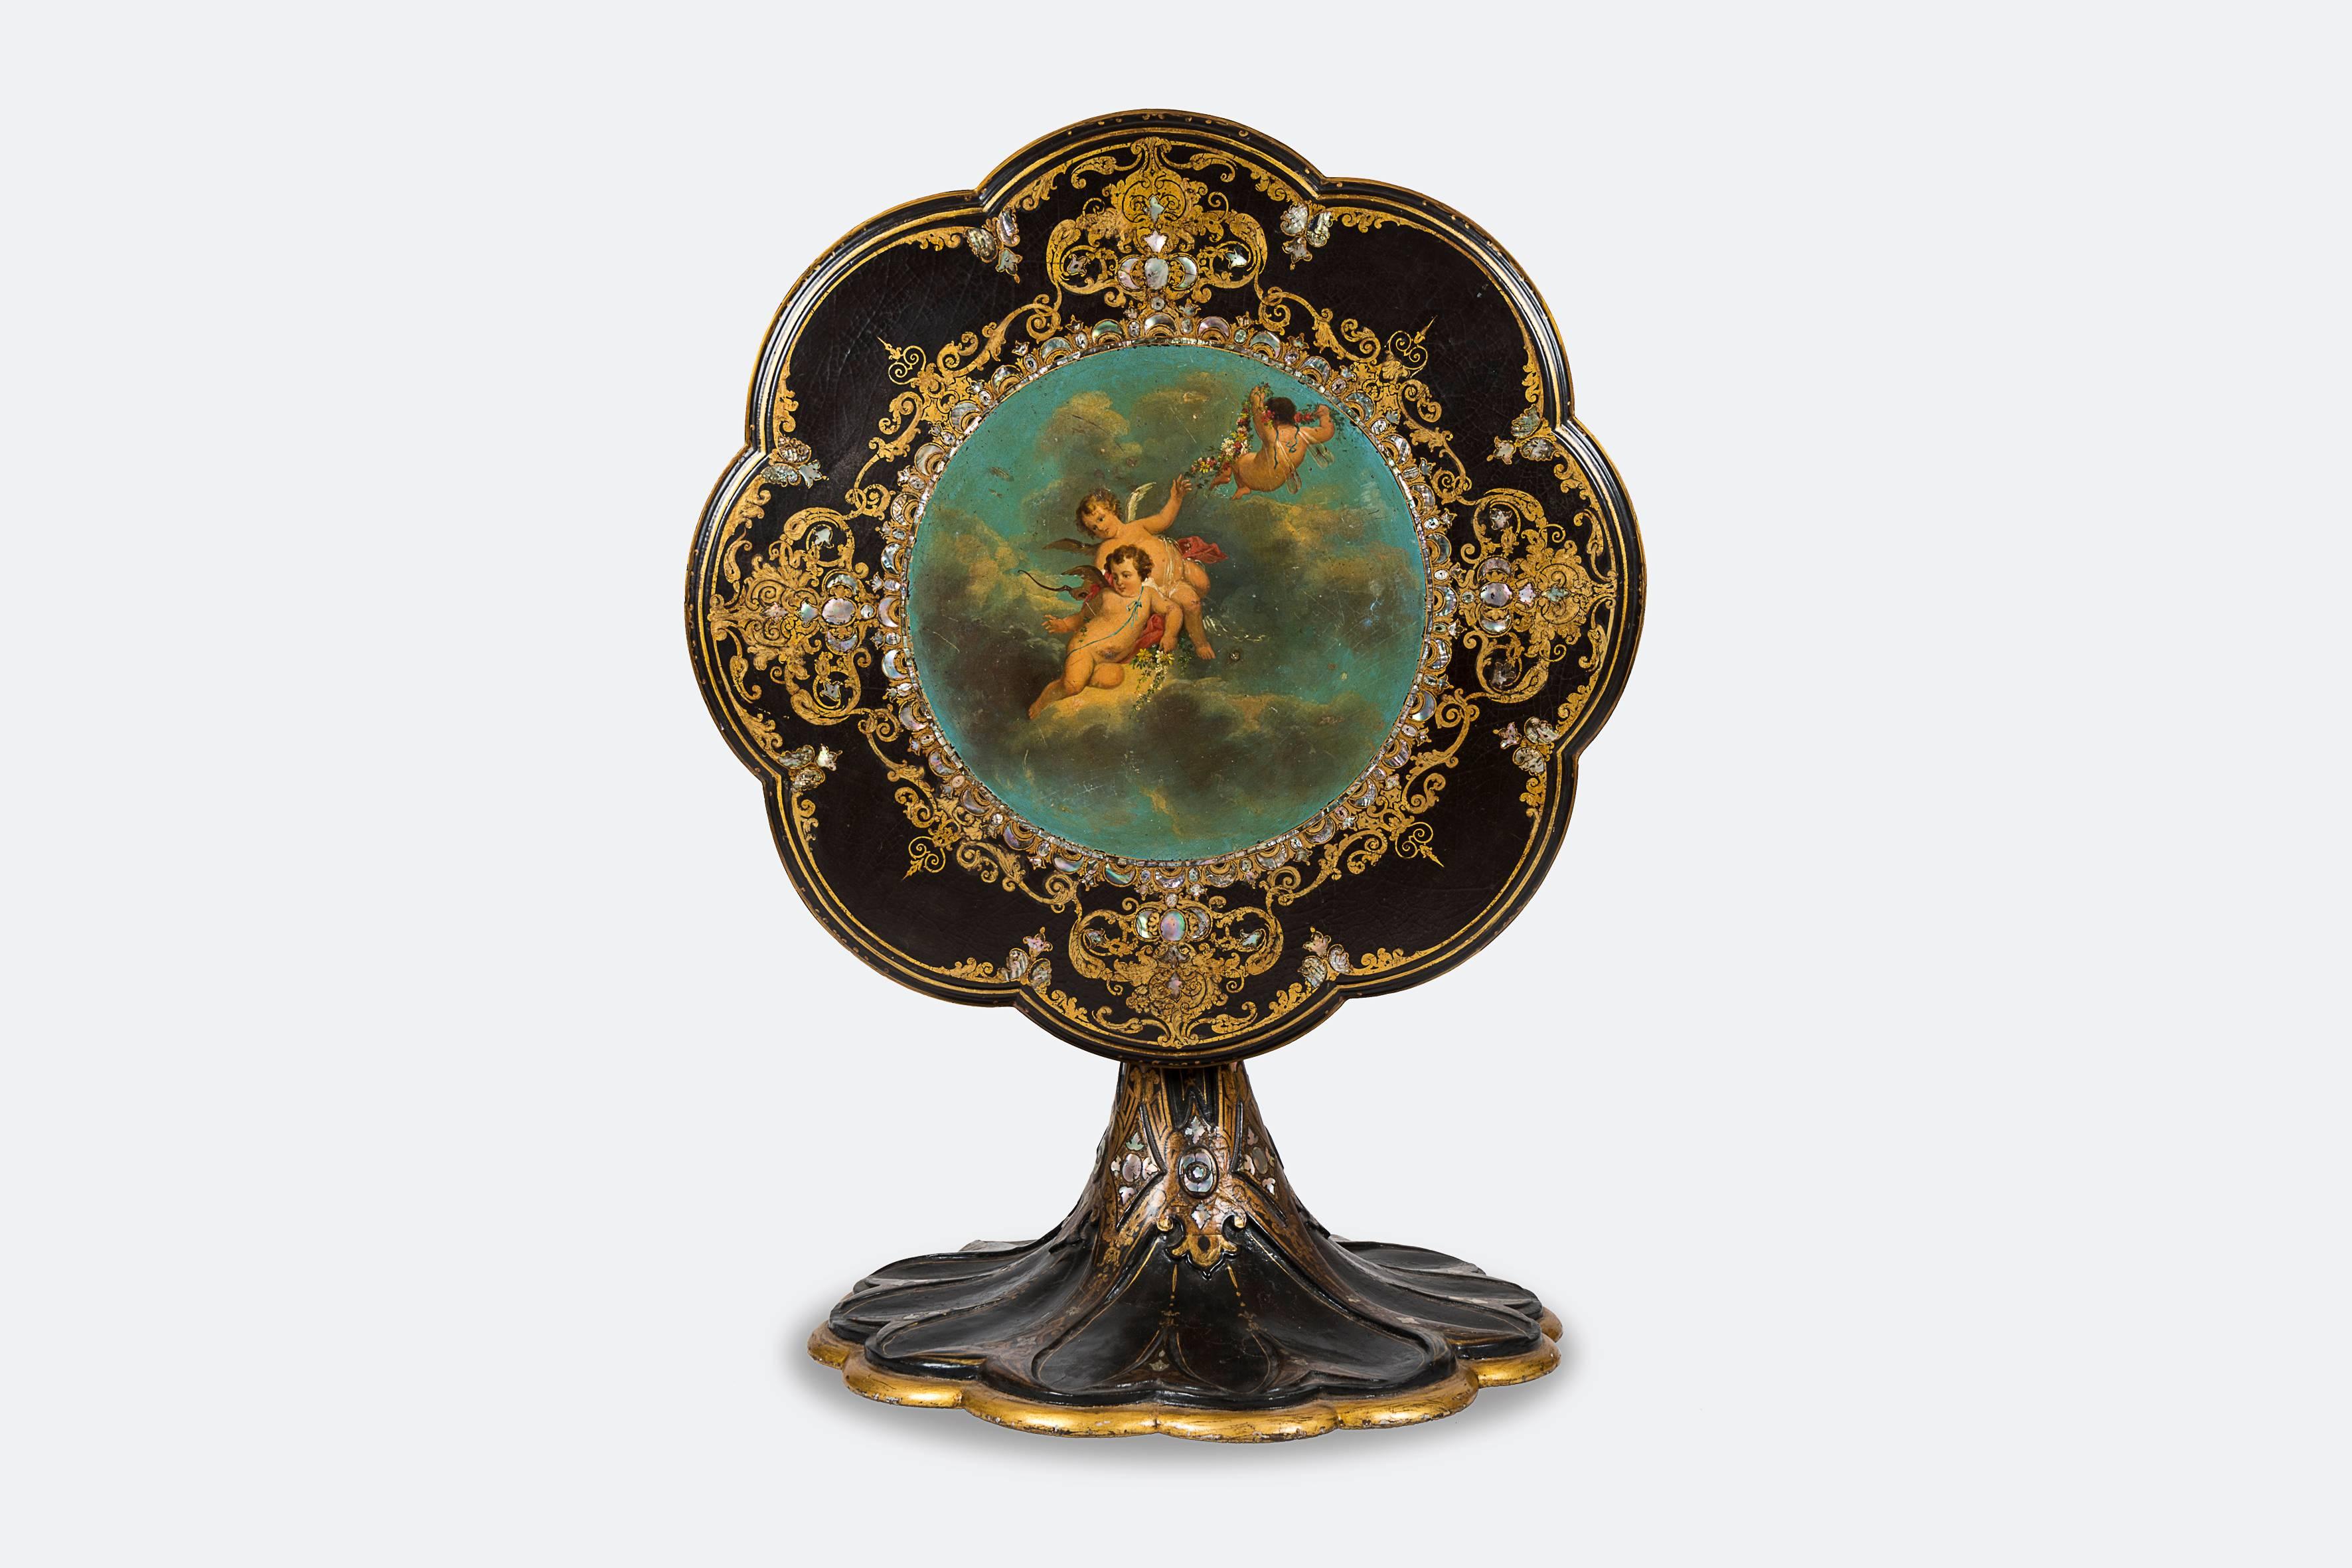 Mother-of-pearl inlaid pedestal.